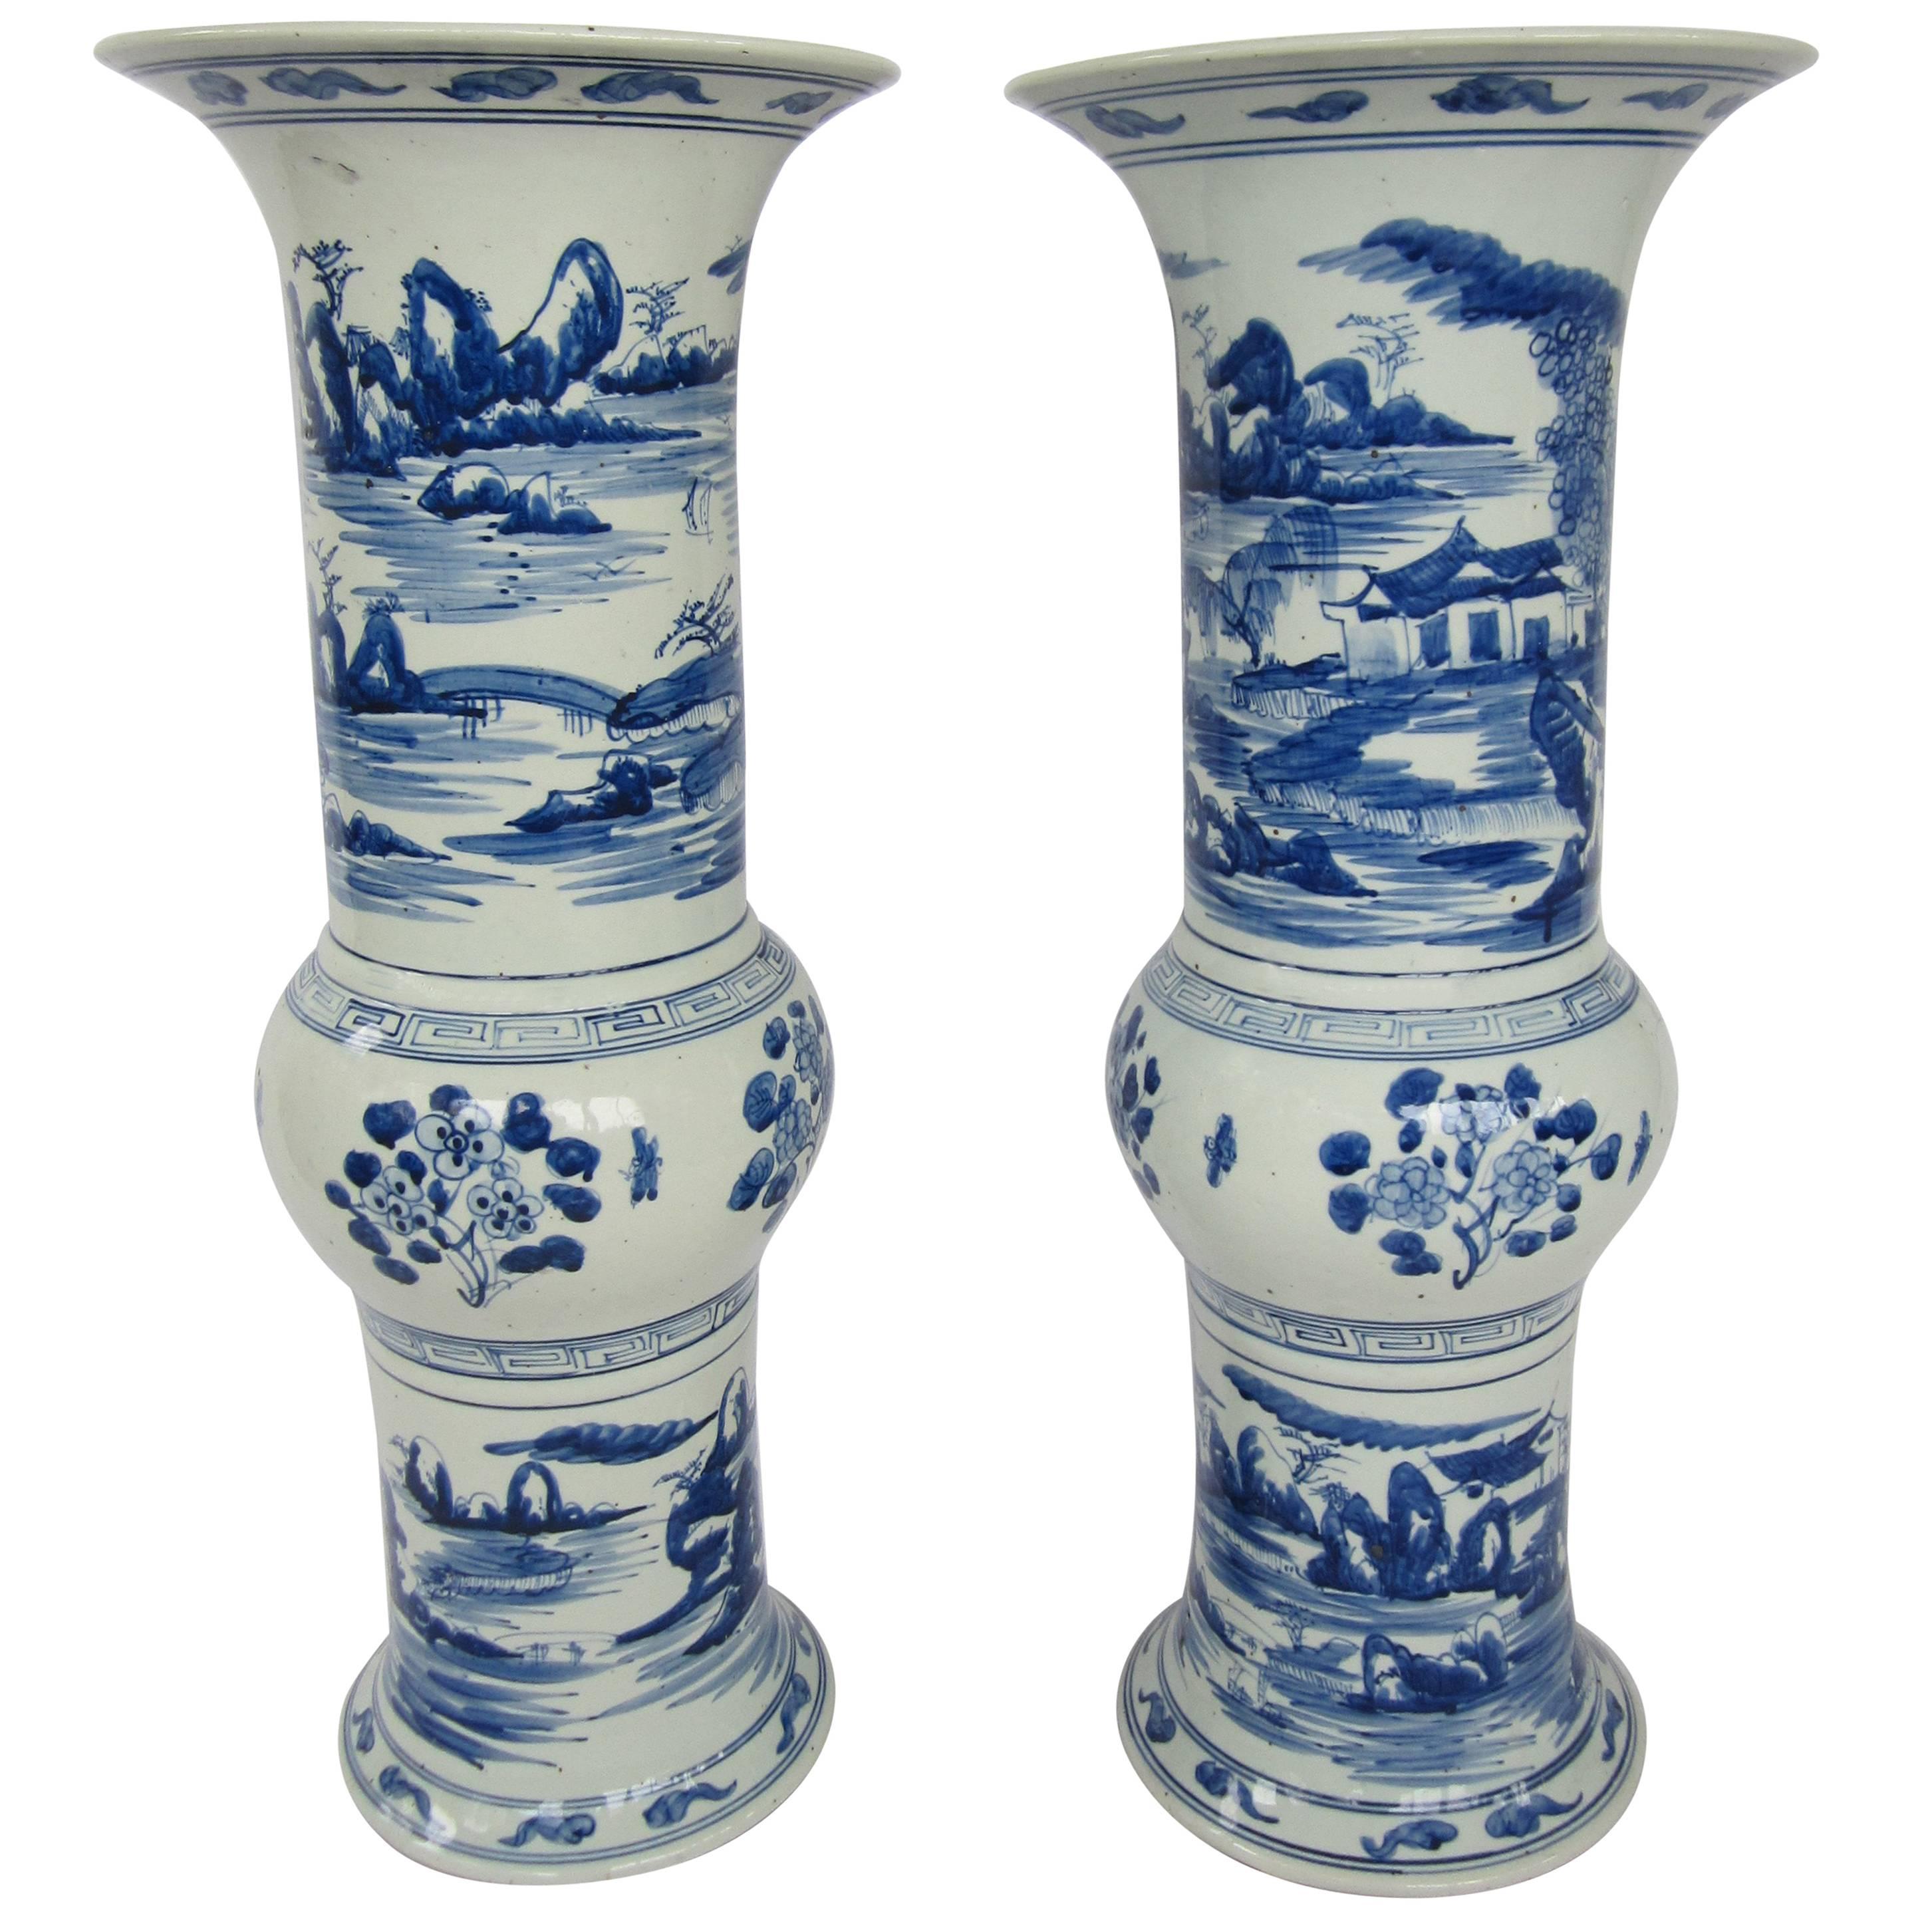 Pair of Large Blue and White Chinese Trumpet Vases